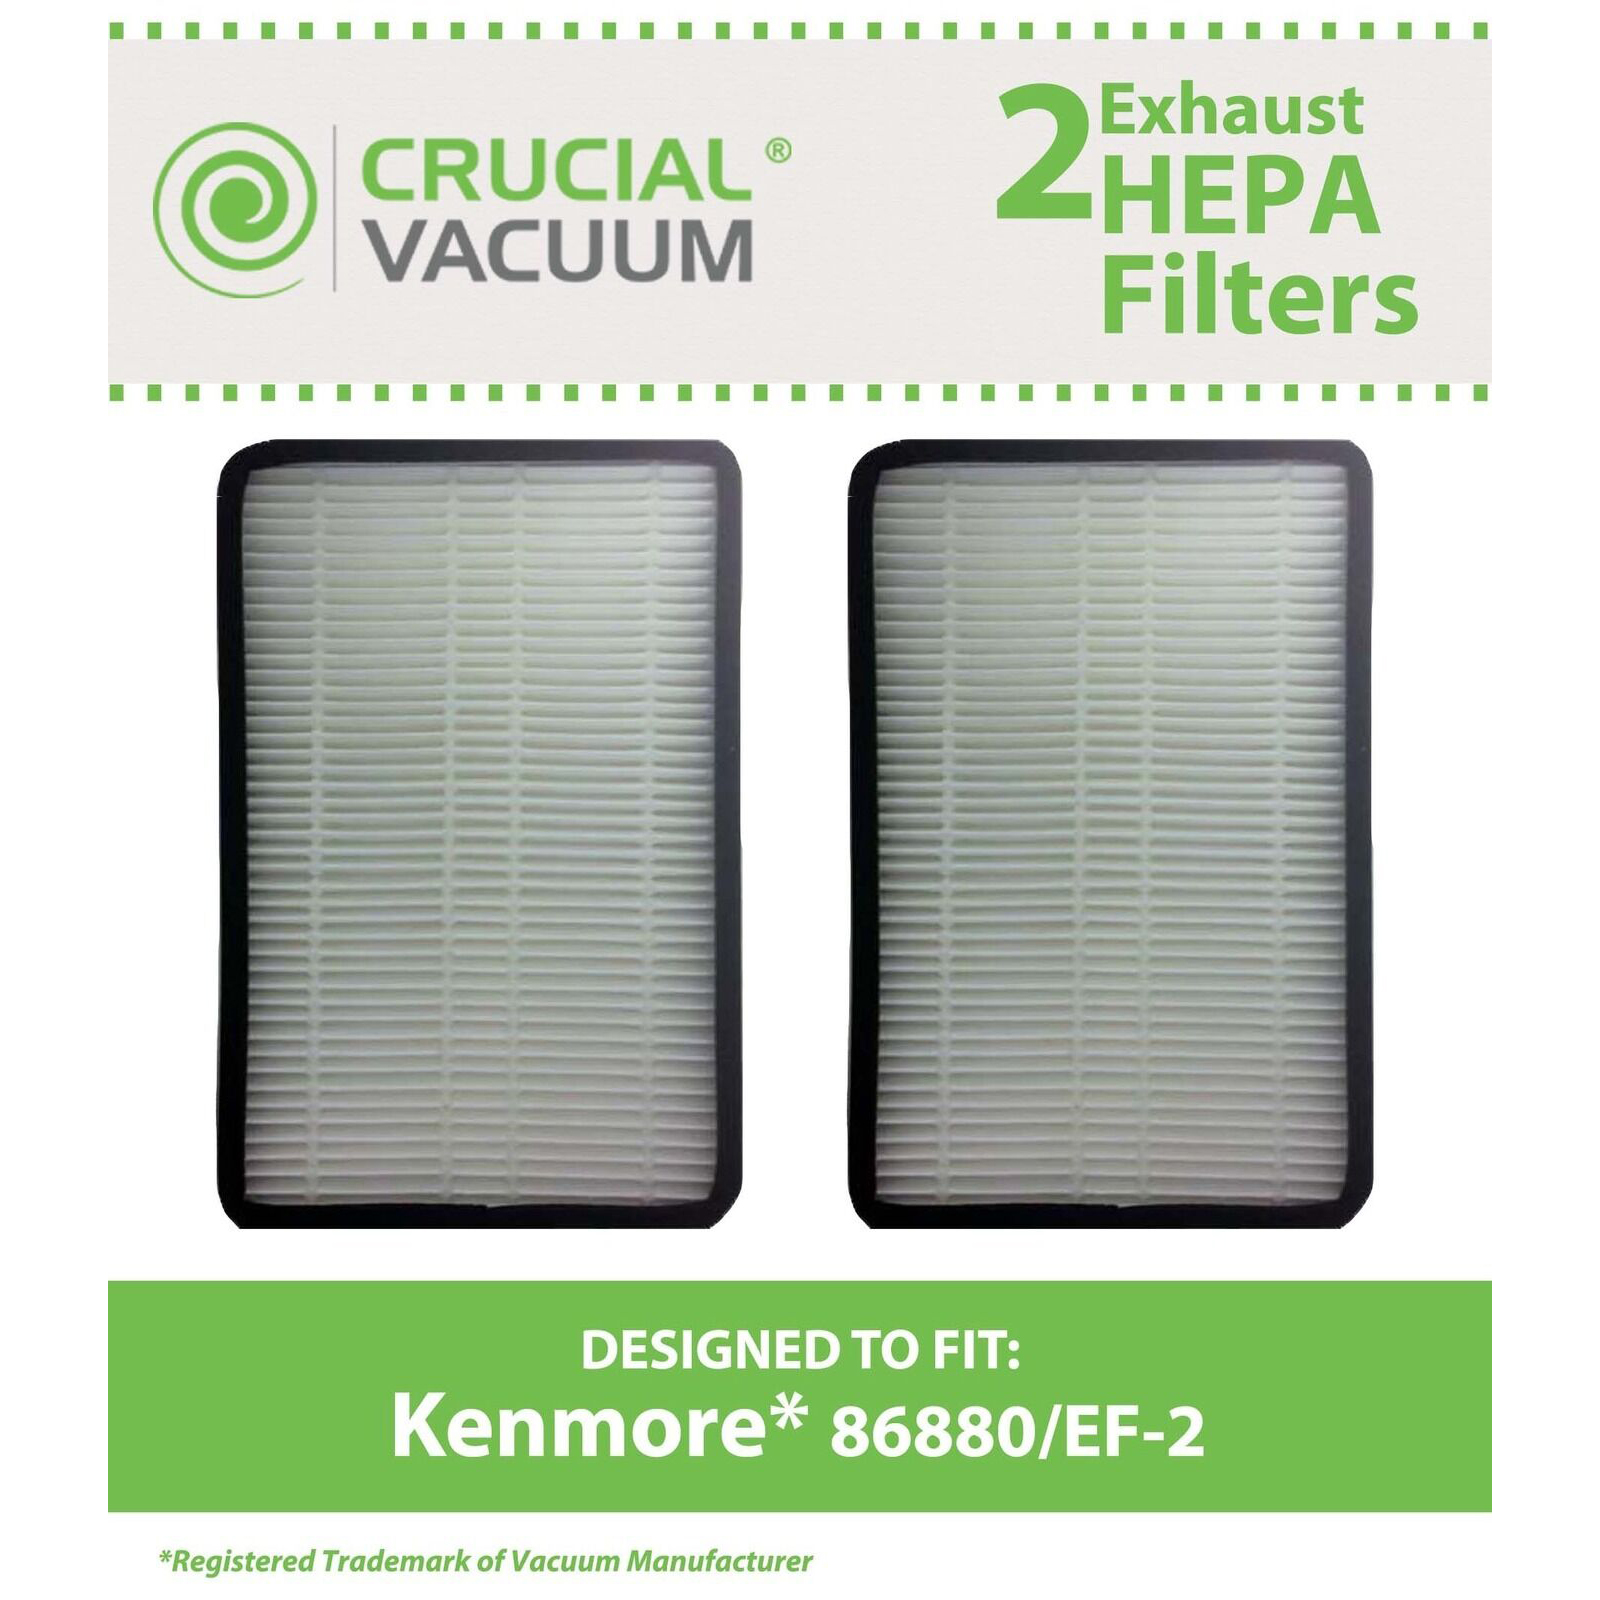 Crucial Vacuum 2pc. Replacement HEPA EF2 Exhaust Filters for Kenmore